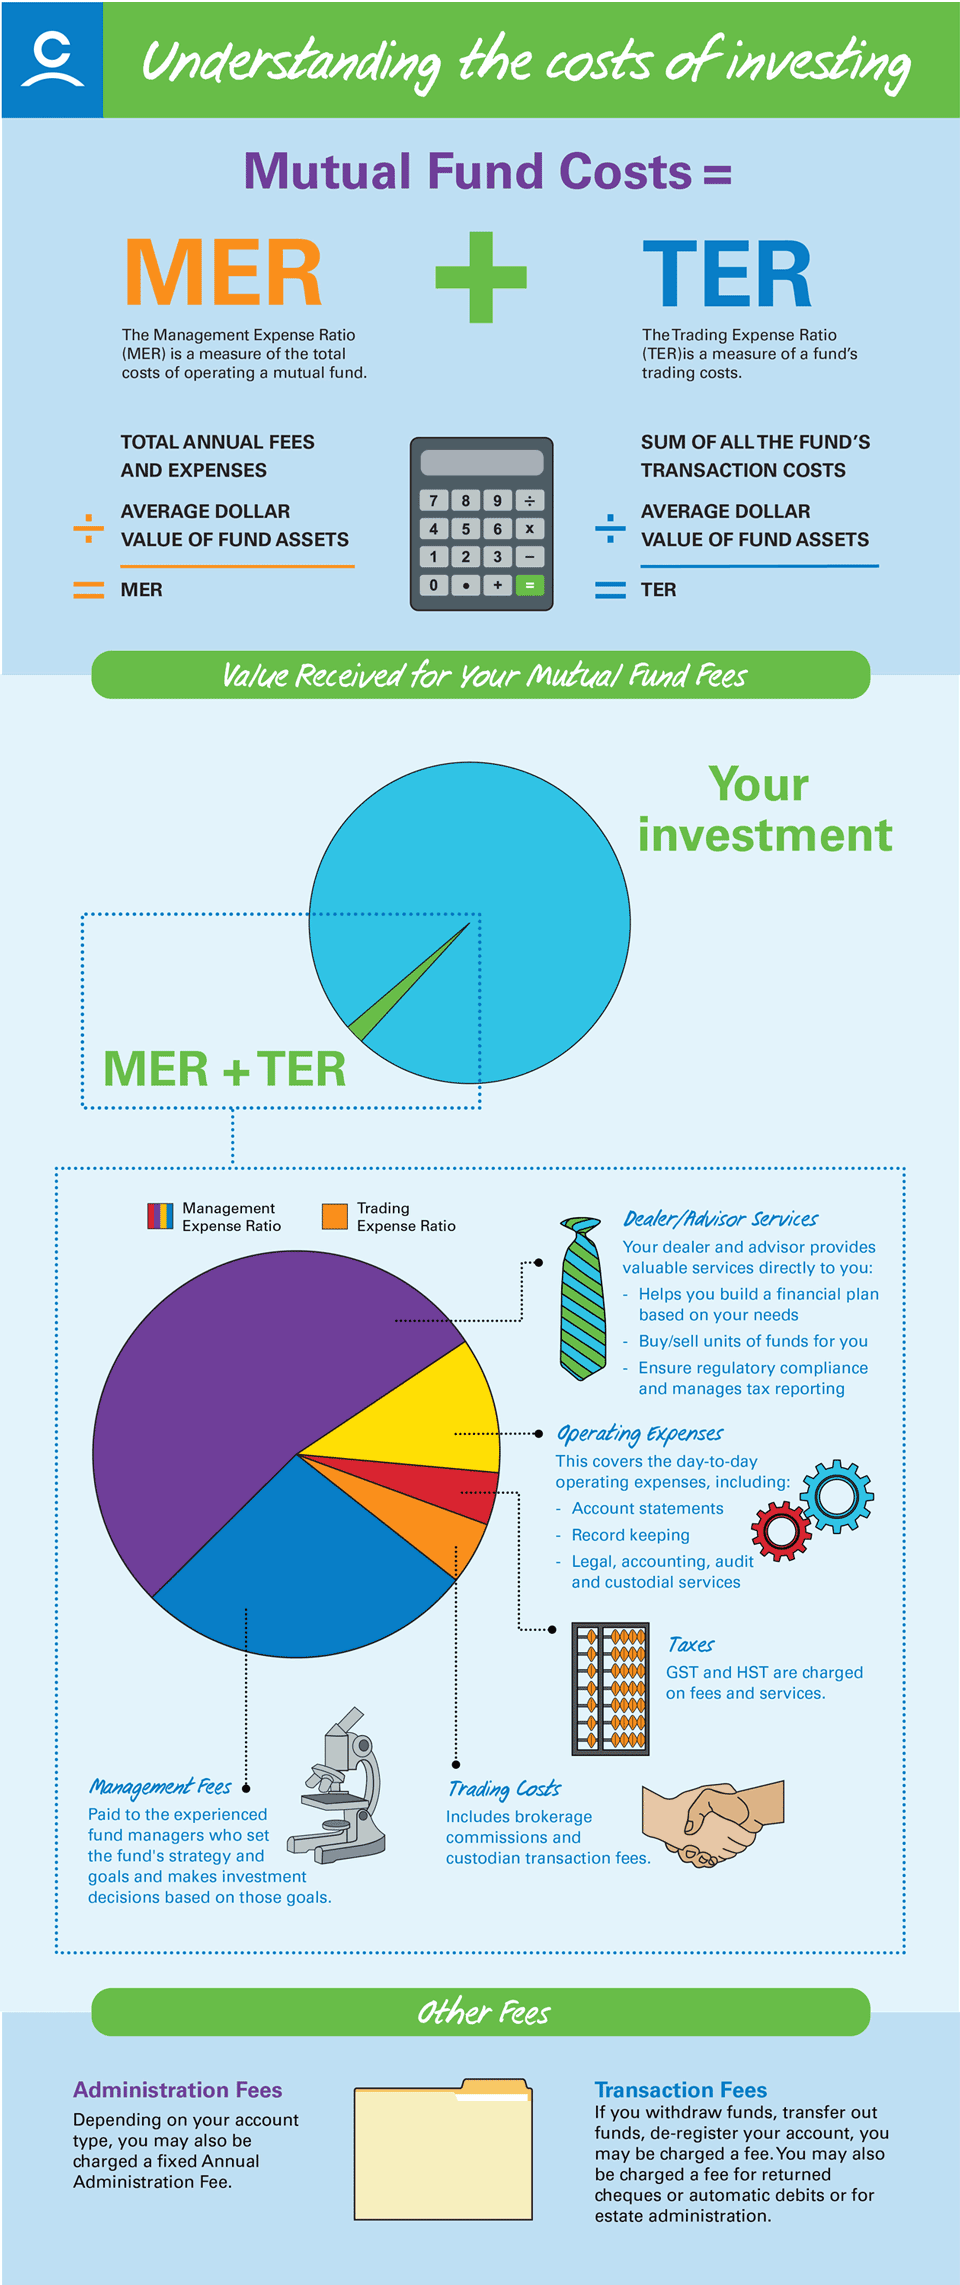 Understanding the costs of investing